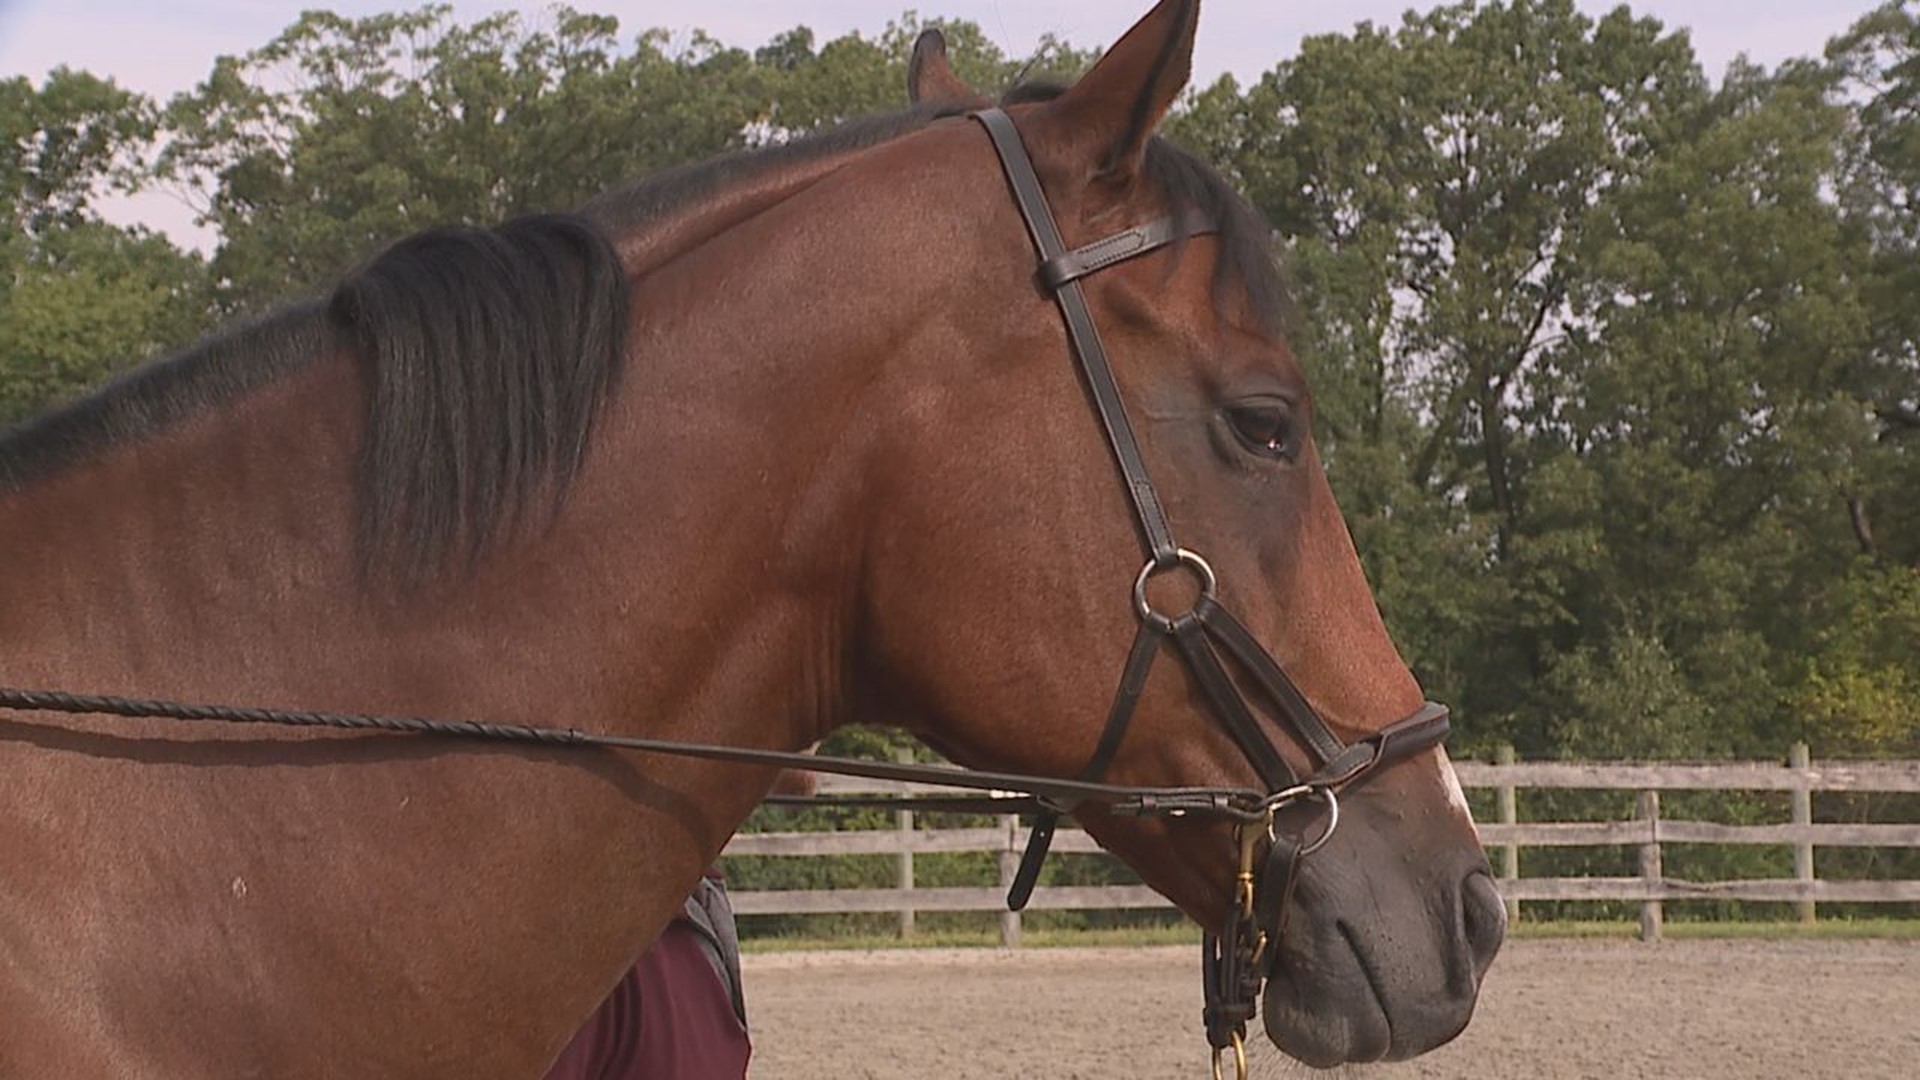 Leg Up Farm's program helps veterans and first responders cope with Post Traumatic Stress Disorder through horses.